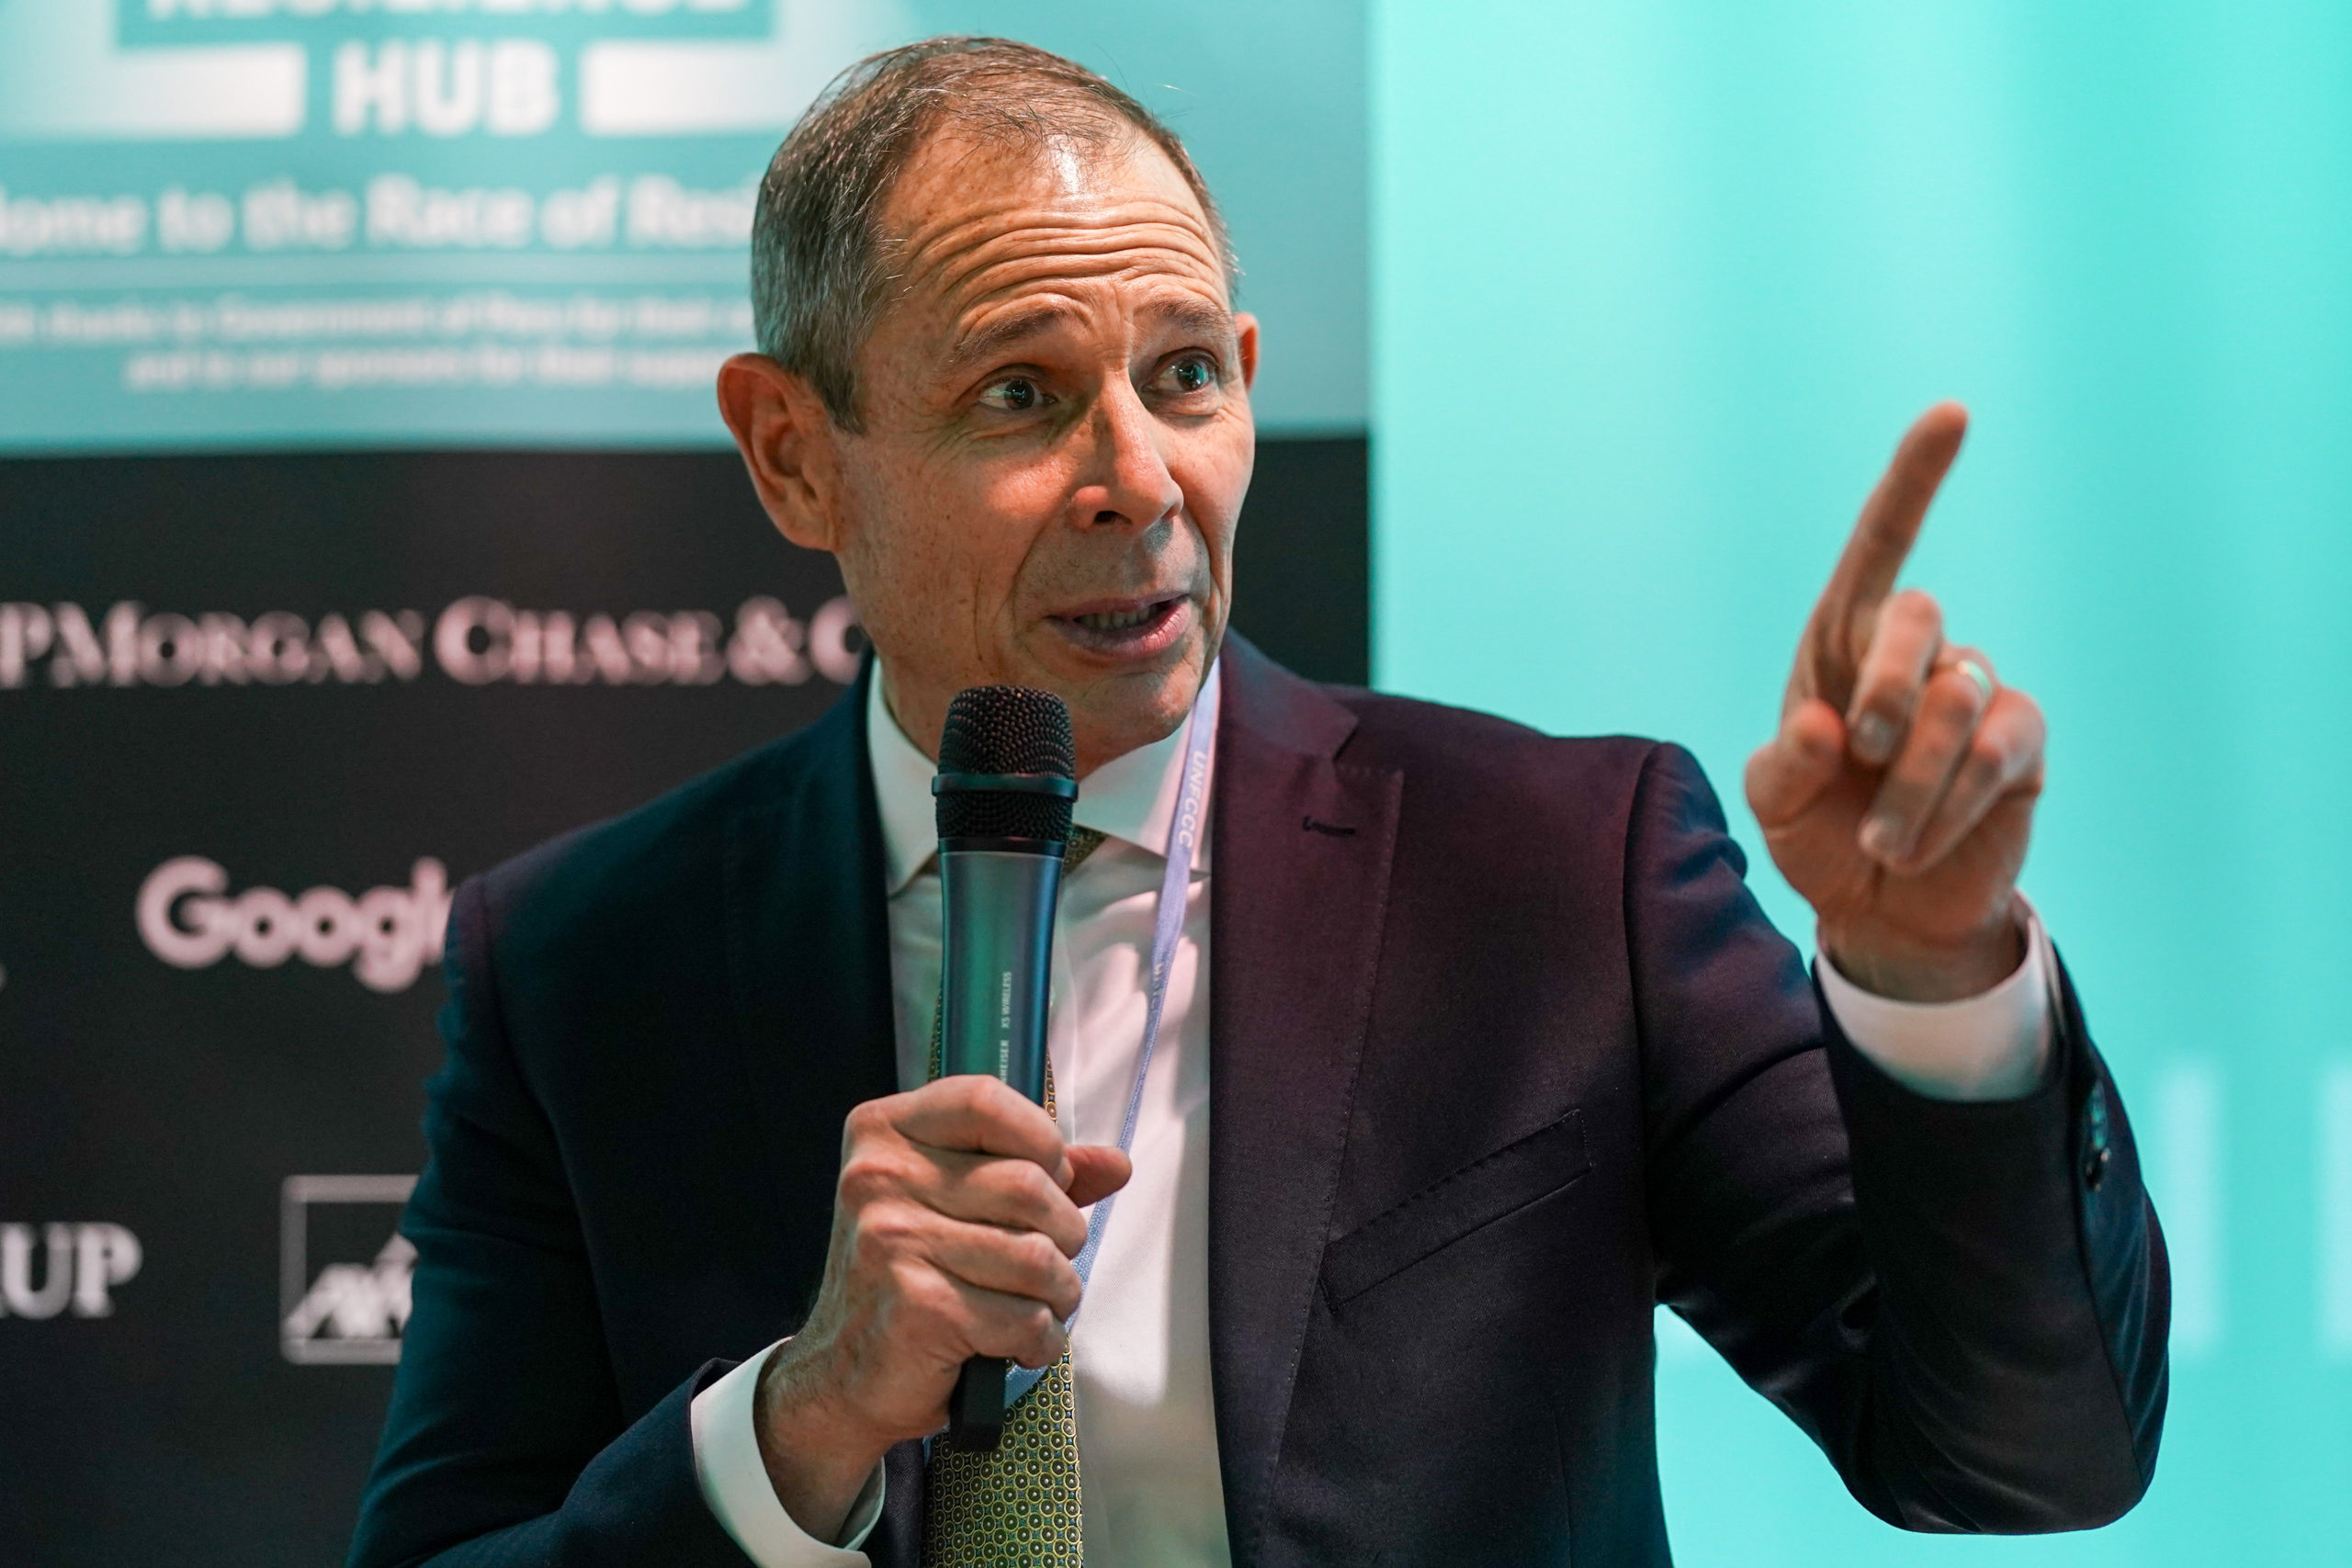 Republican Utah Rep. John Curtis, who founded the House Conservative Climate Caucus, speaks at the United Nations climate conference on Nov. 6. (Ian Forsyth/Getty Images)